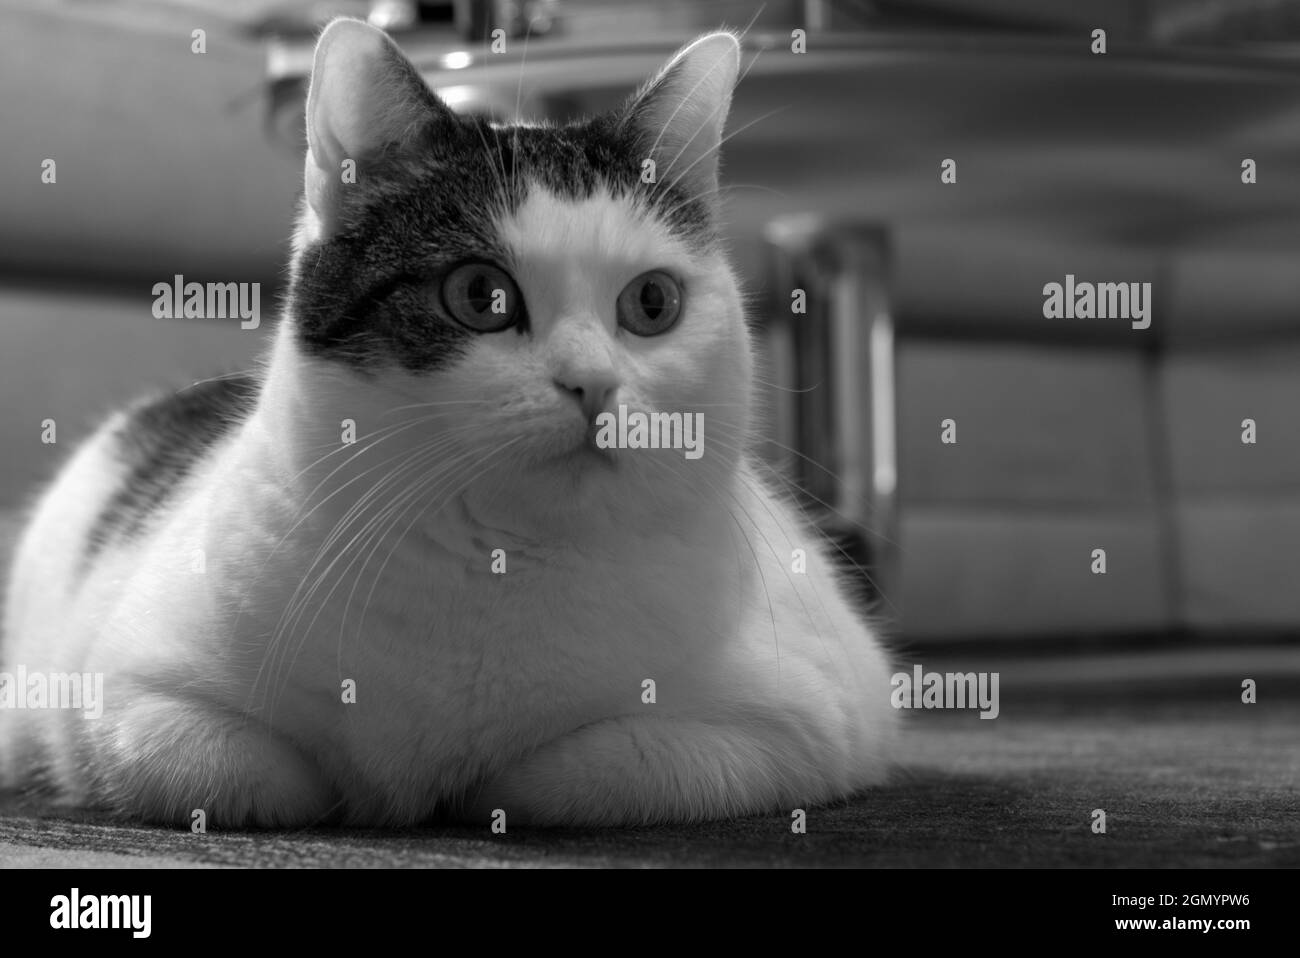 A cat lies relaxed on a carpet and looks into the camera Stock Photo